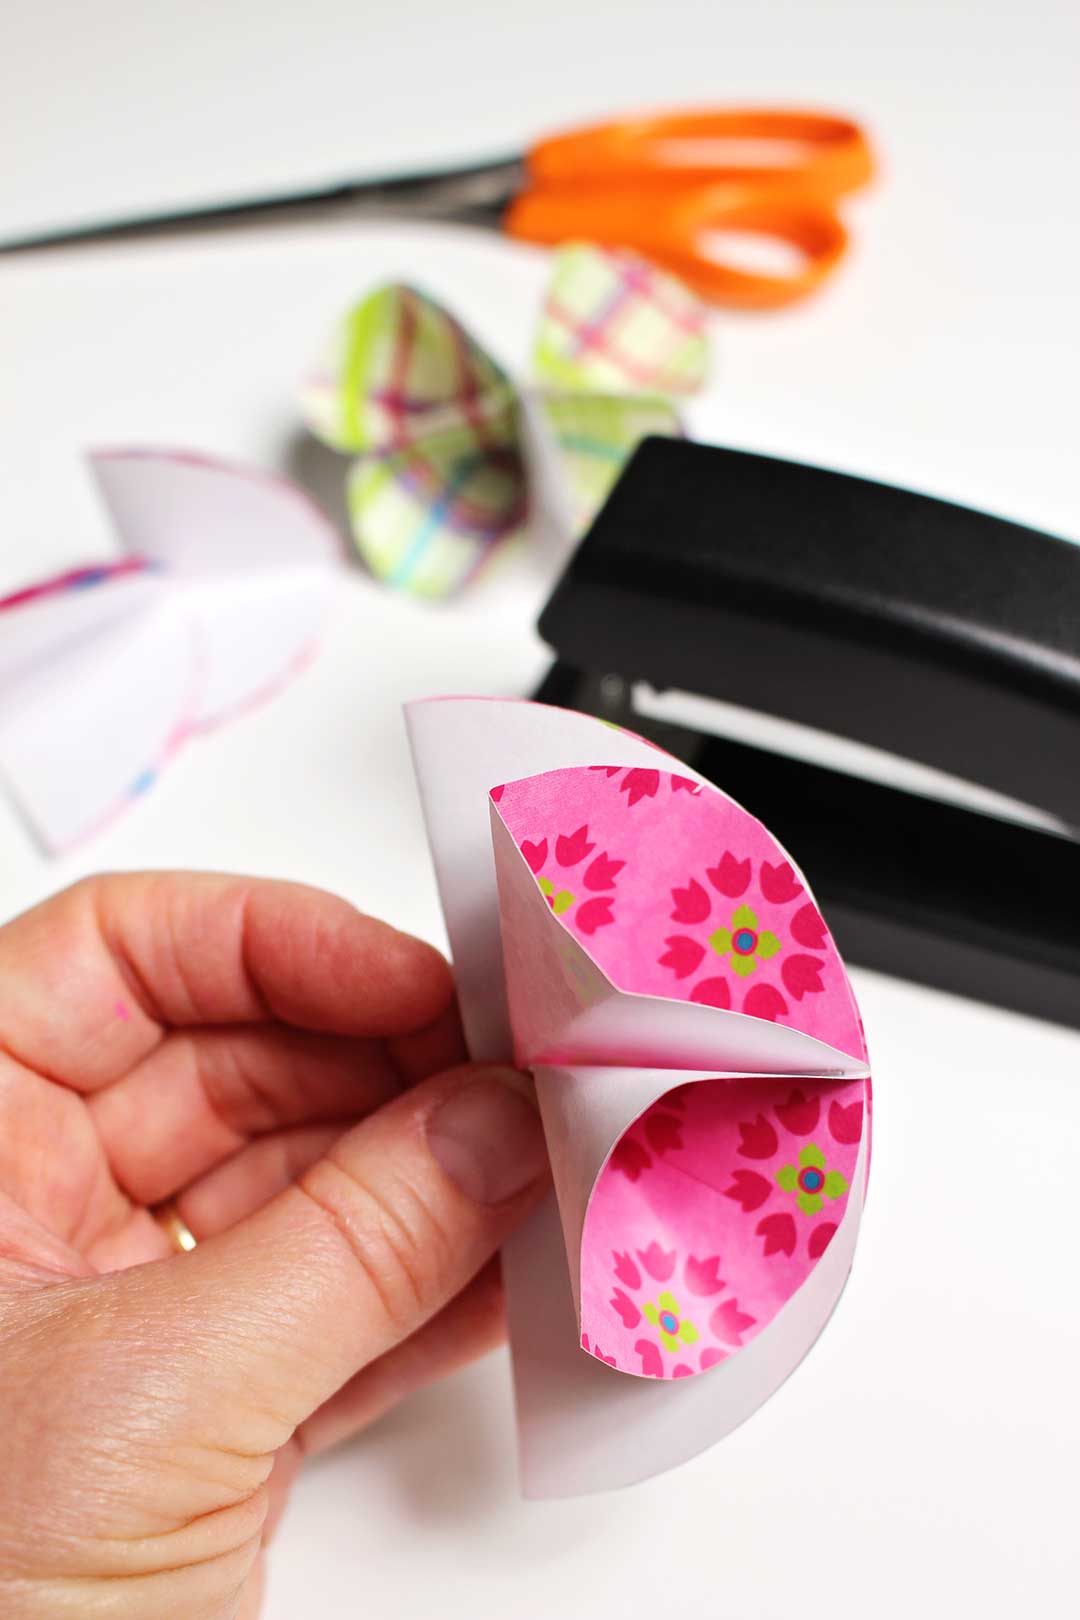 Several circles of pink and green paper stapled together.